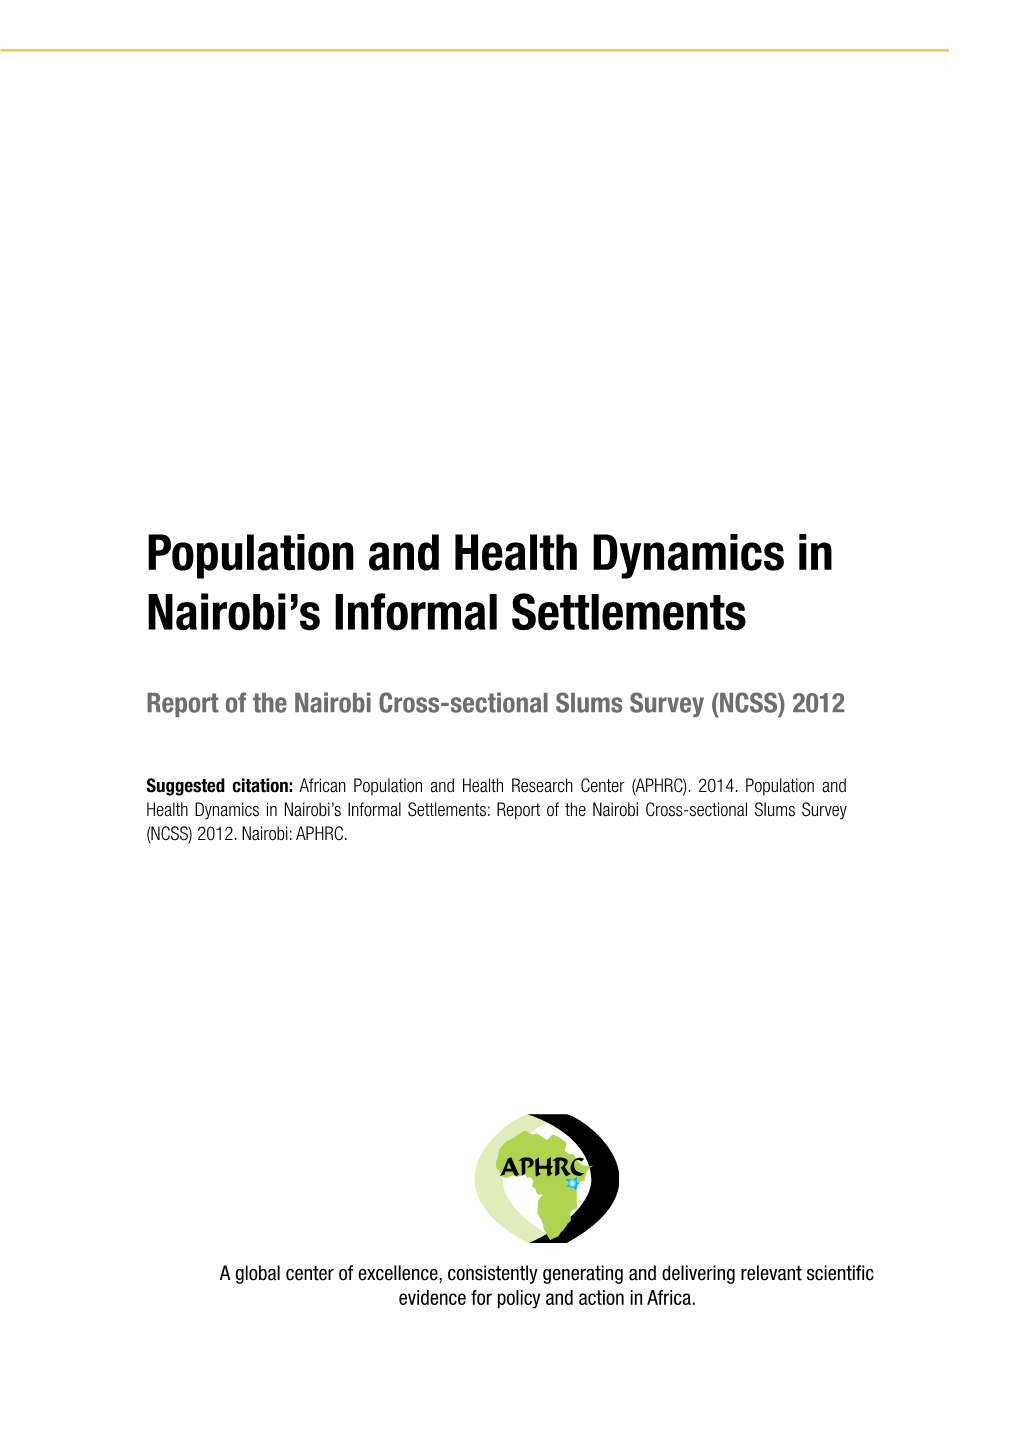 Population and Health Dynamics in Nairobi's Informal Settlements